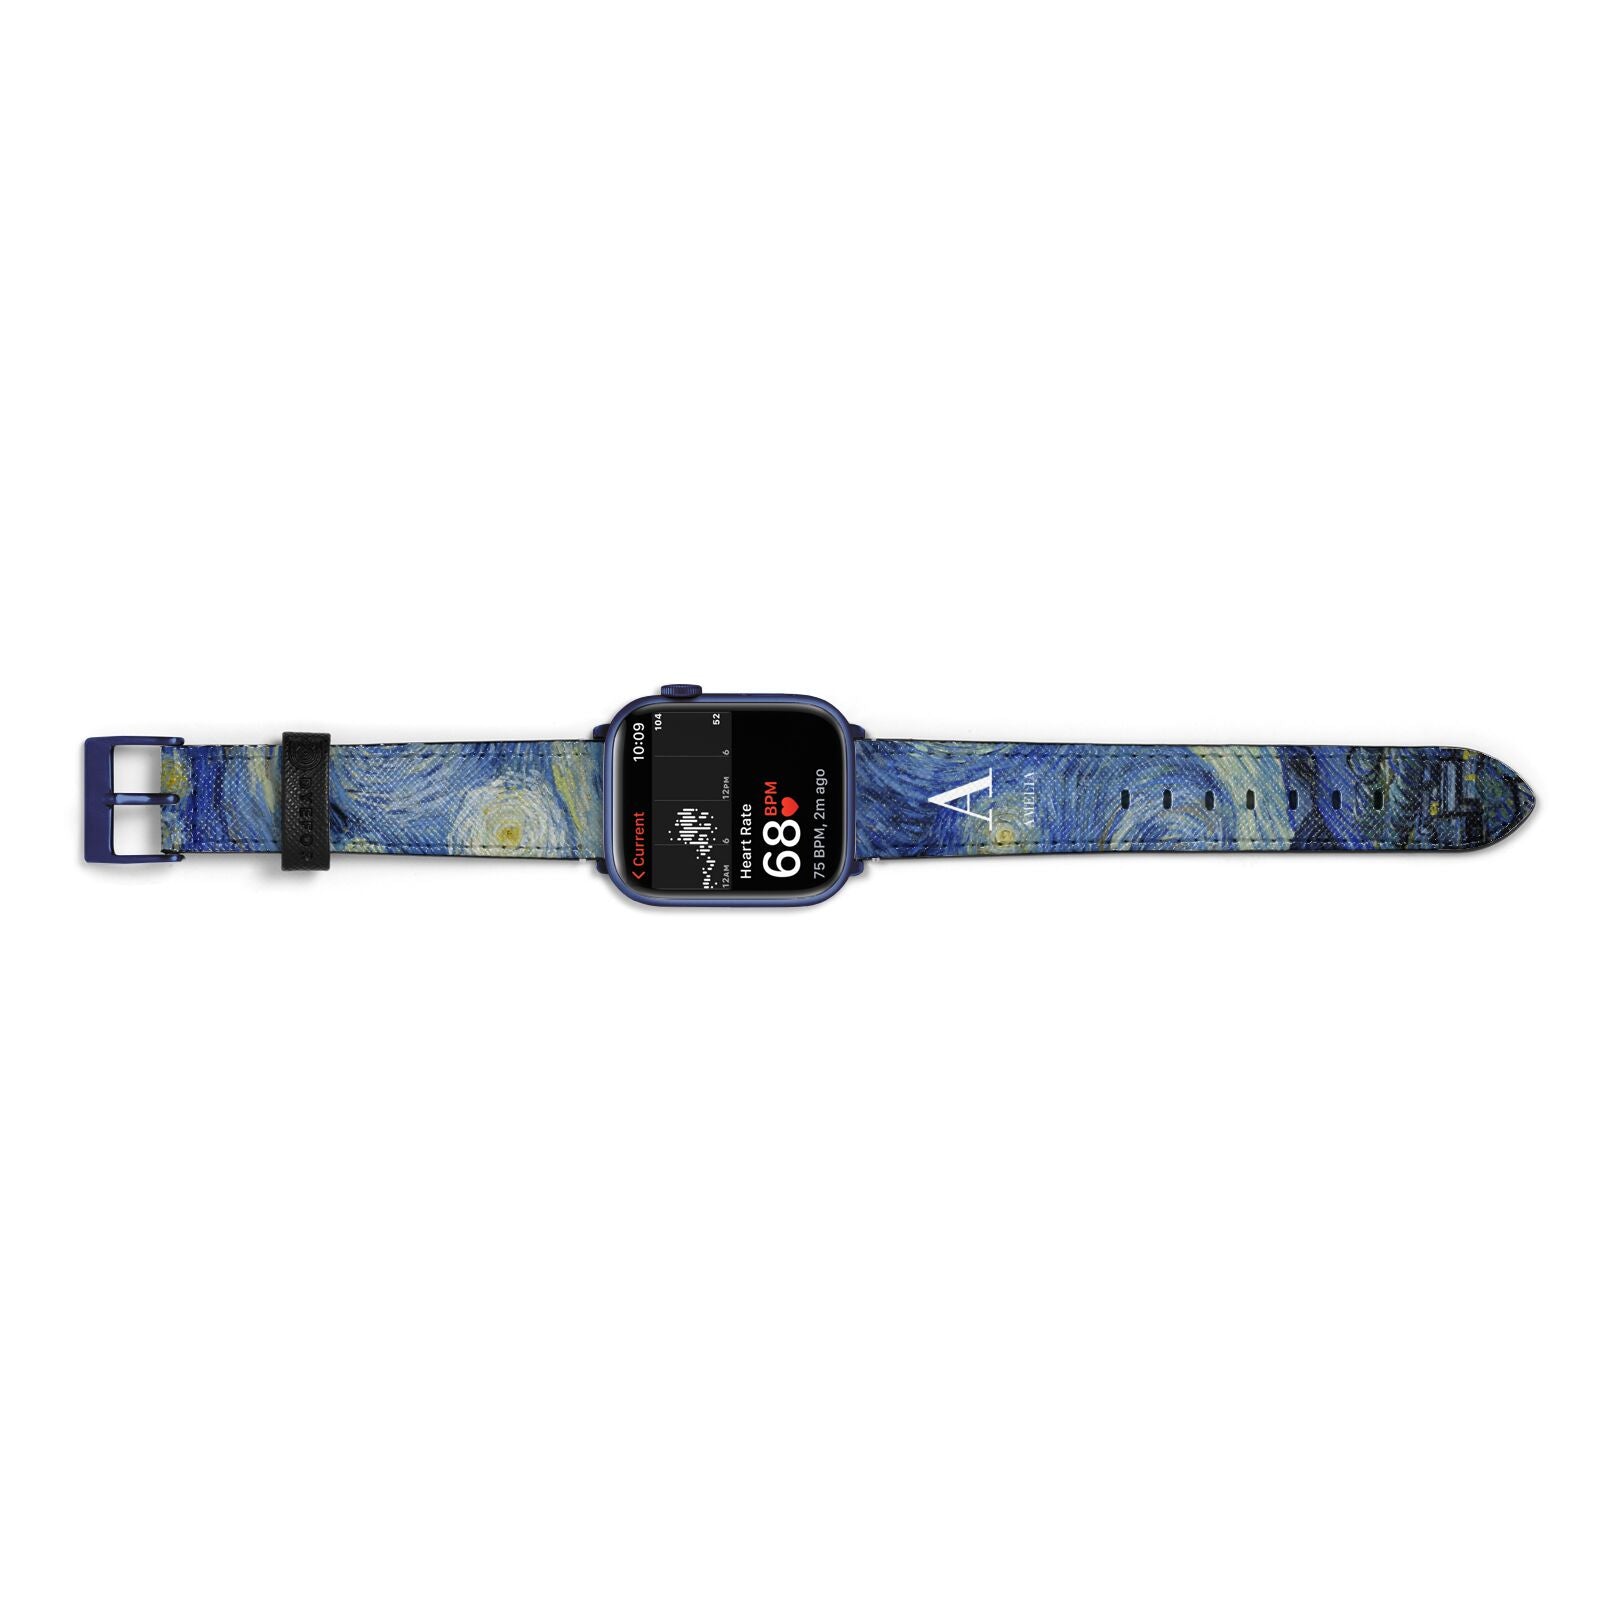 Personalised Van Gogh Starry Night Apple Watch Strap Size 38mm Landscape Image Blue Hardware